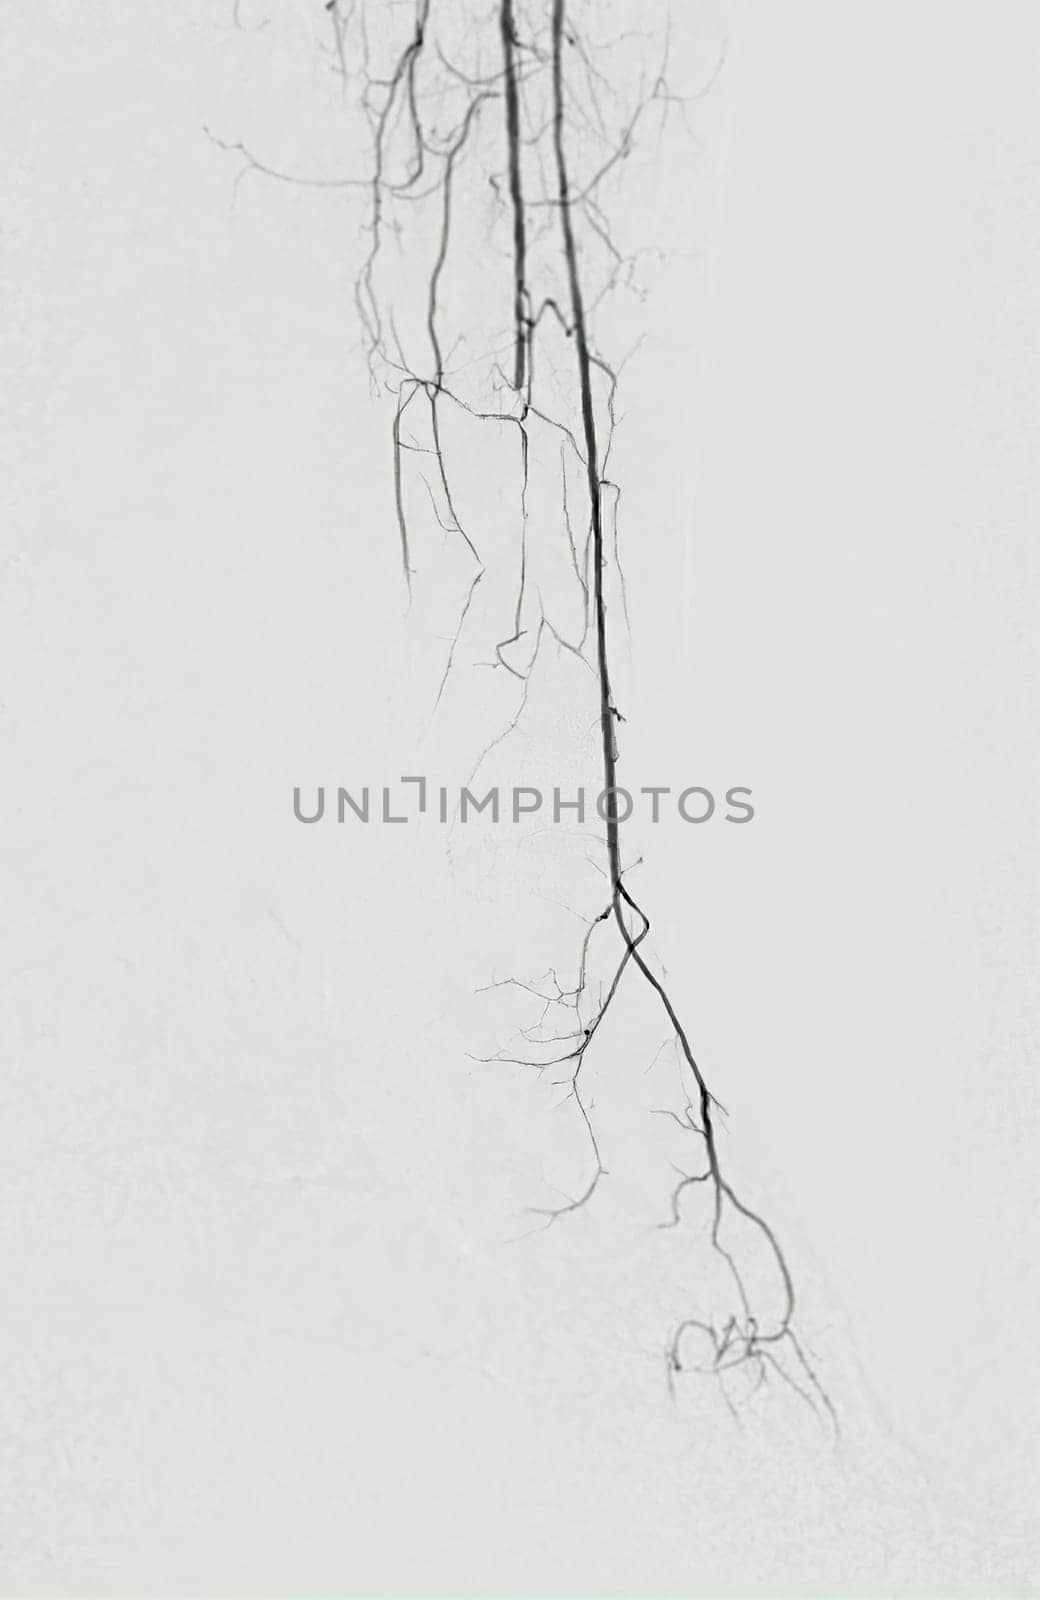 Femoral artery angiogram or angiography  at lower extremity area. by samunella